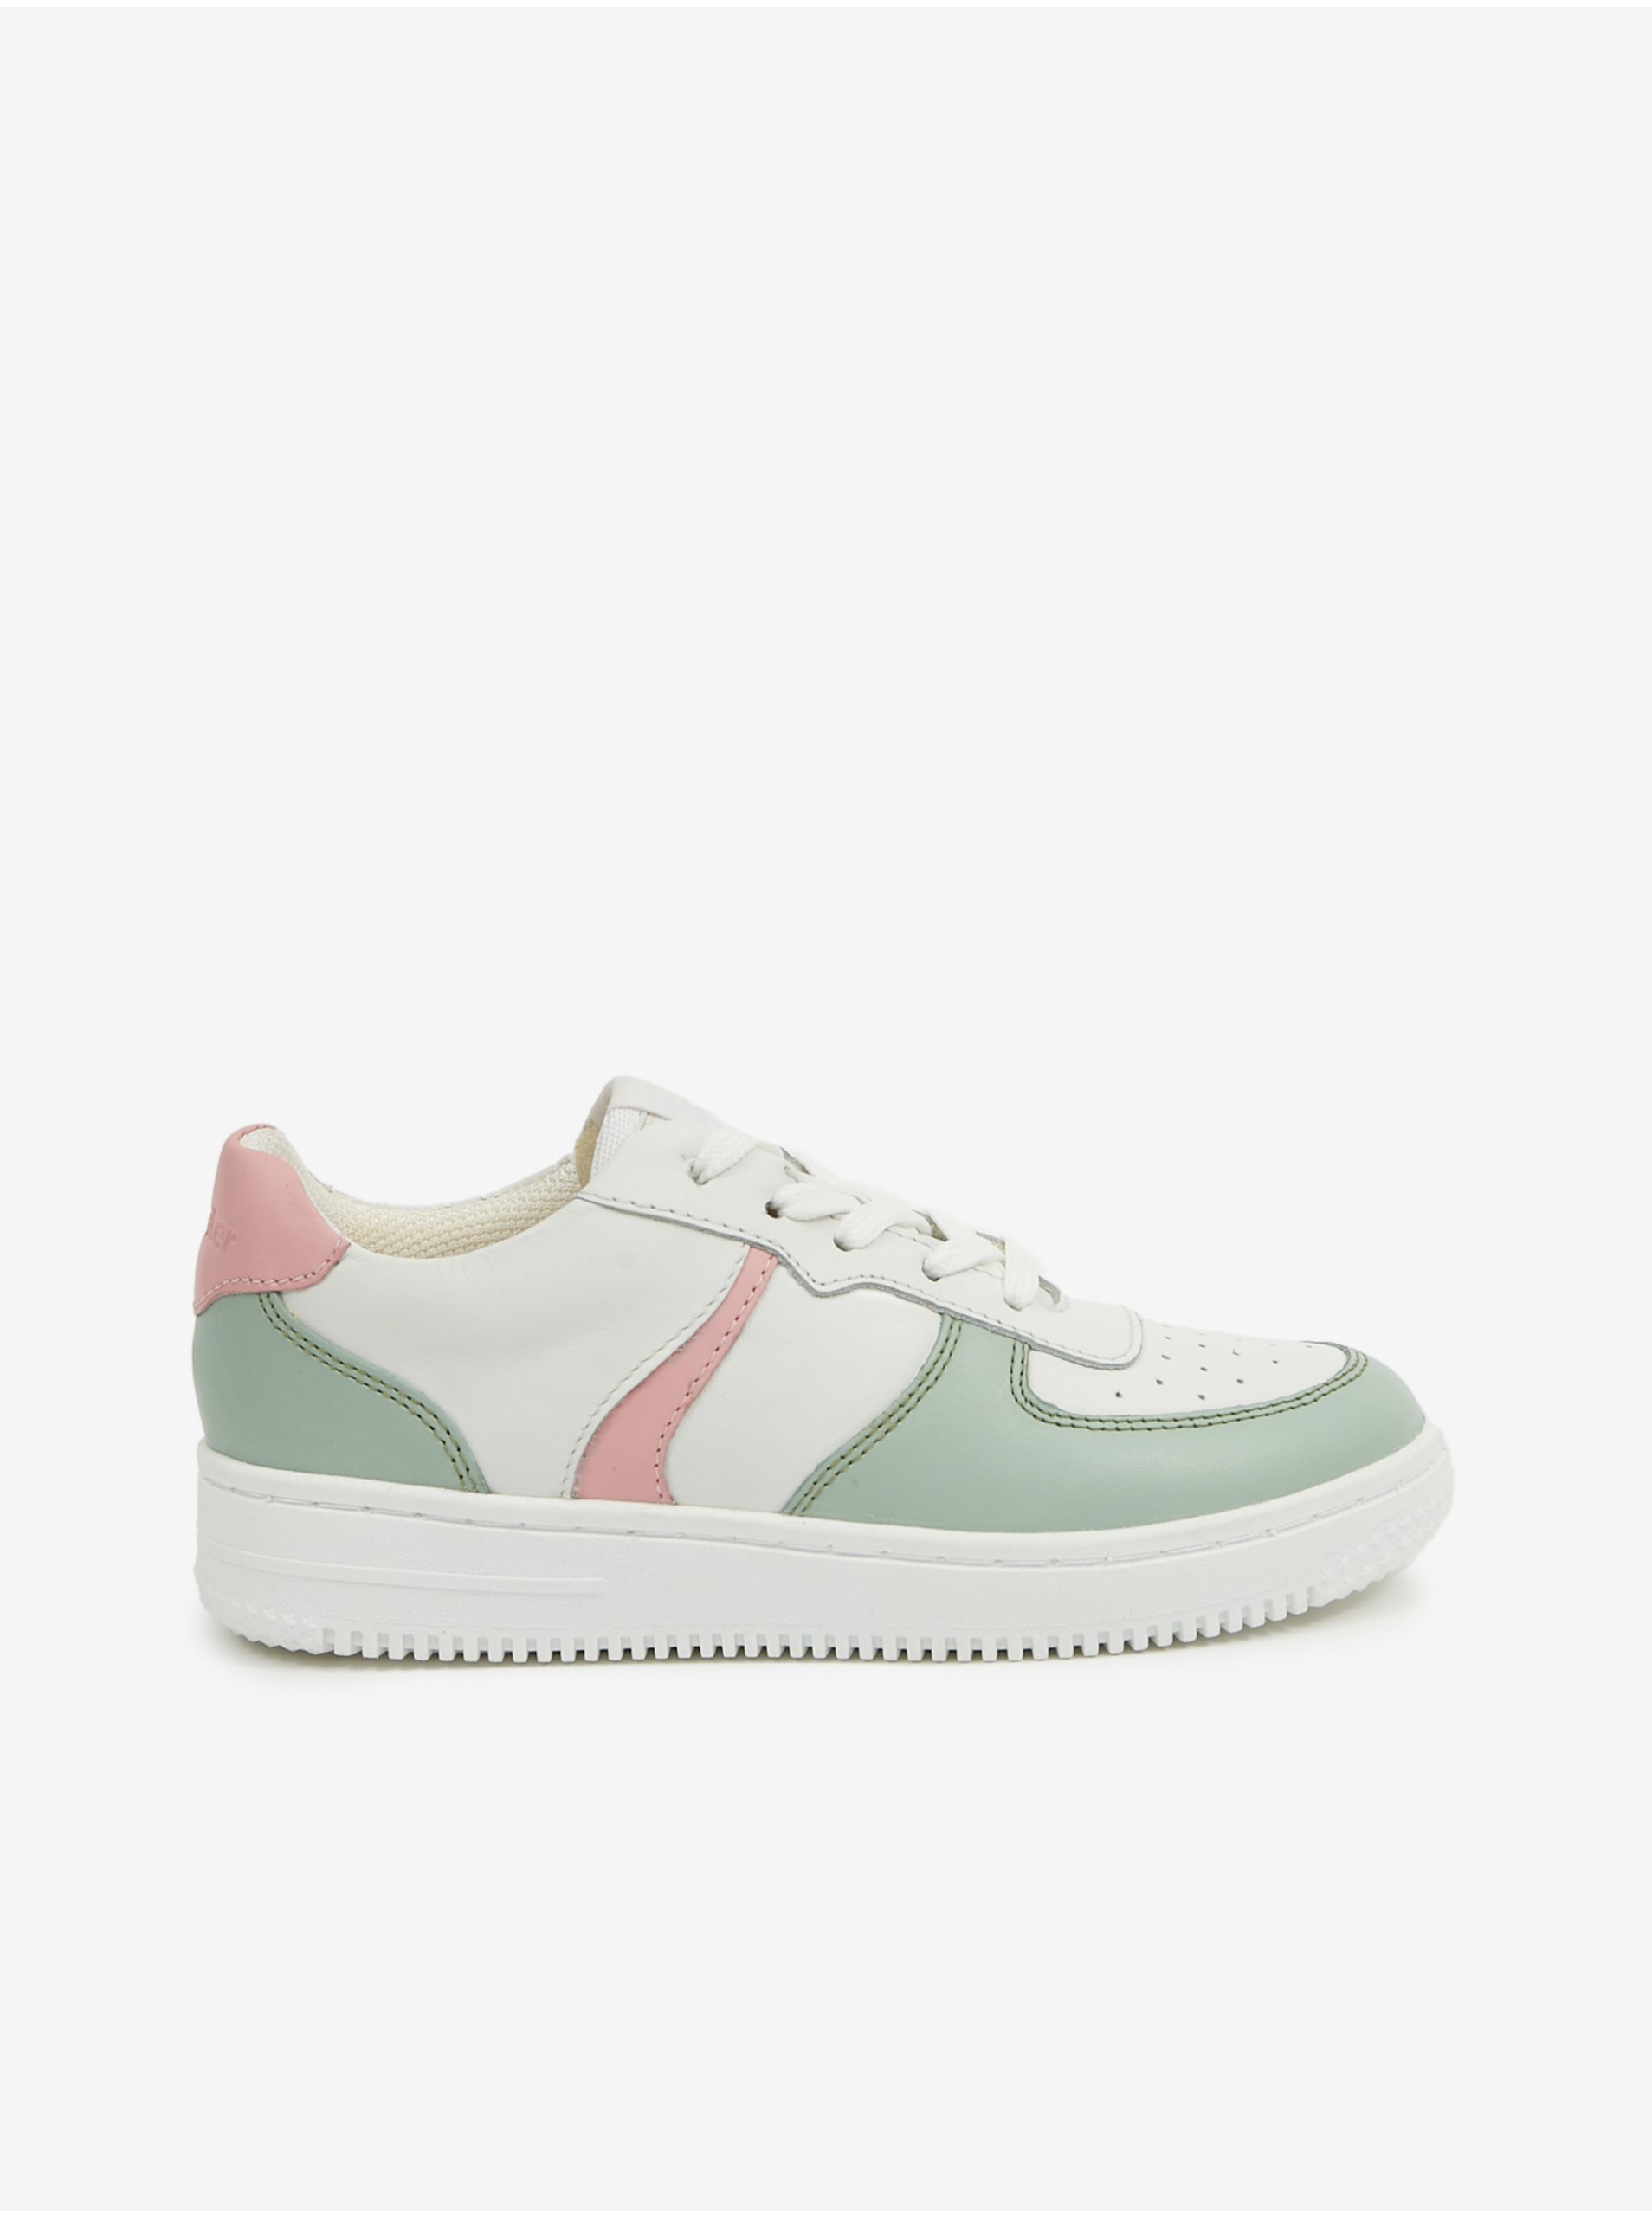 Green-white girly leather sneakers Richter - Girls